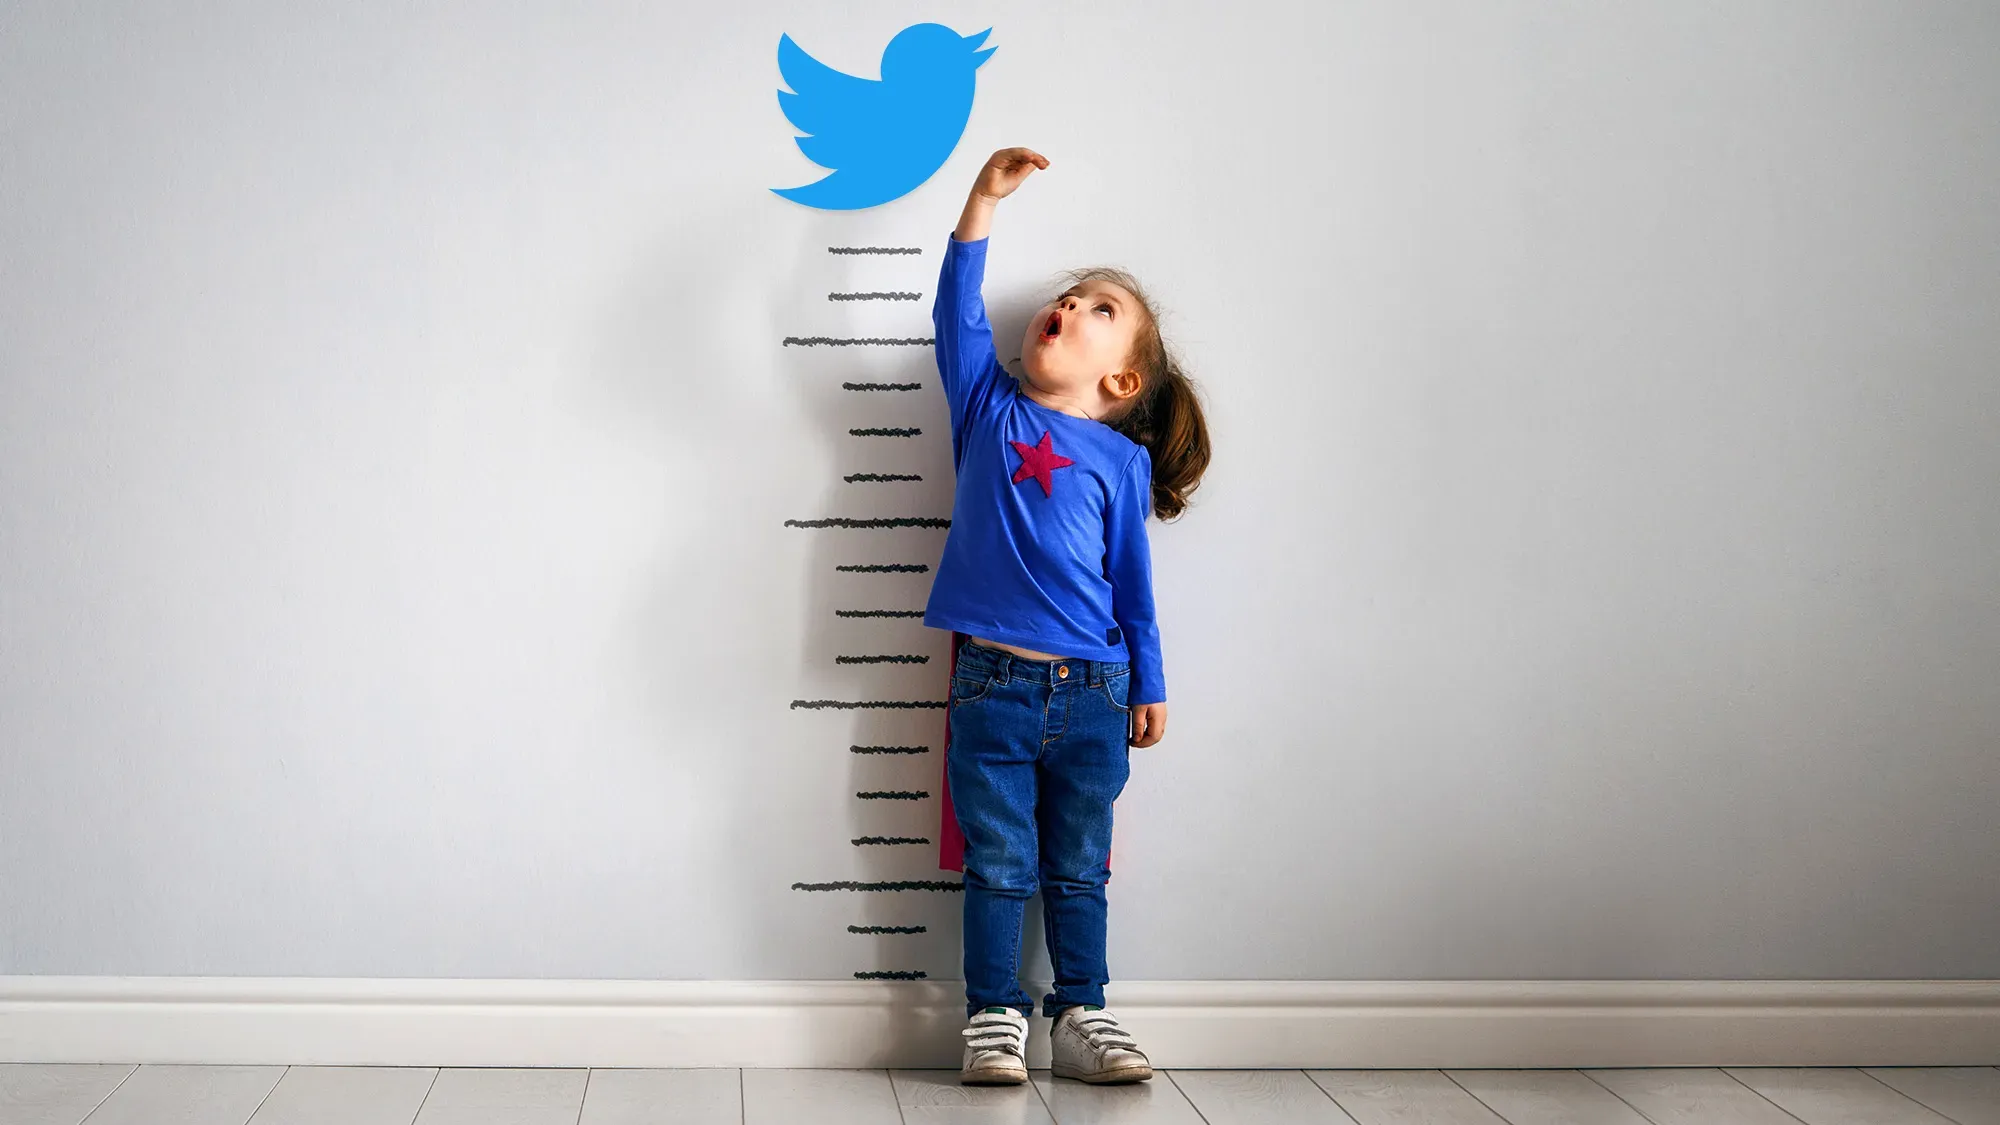 Is Twitter Advertising Coming of Age?